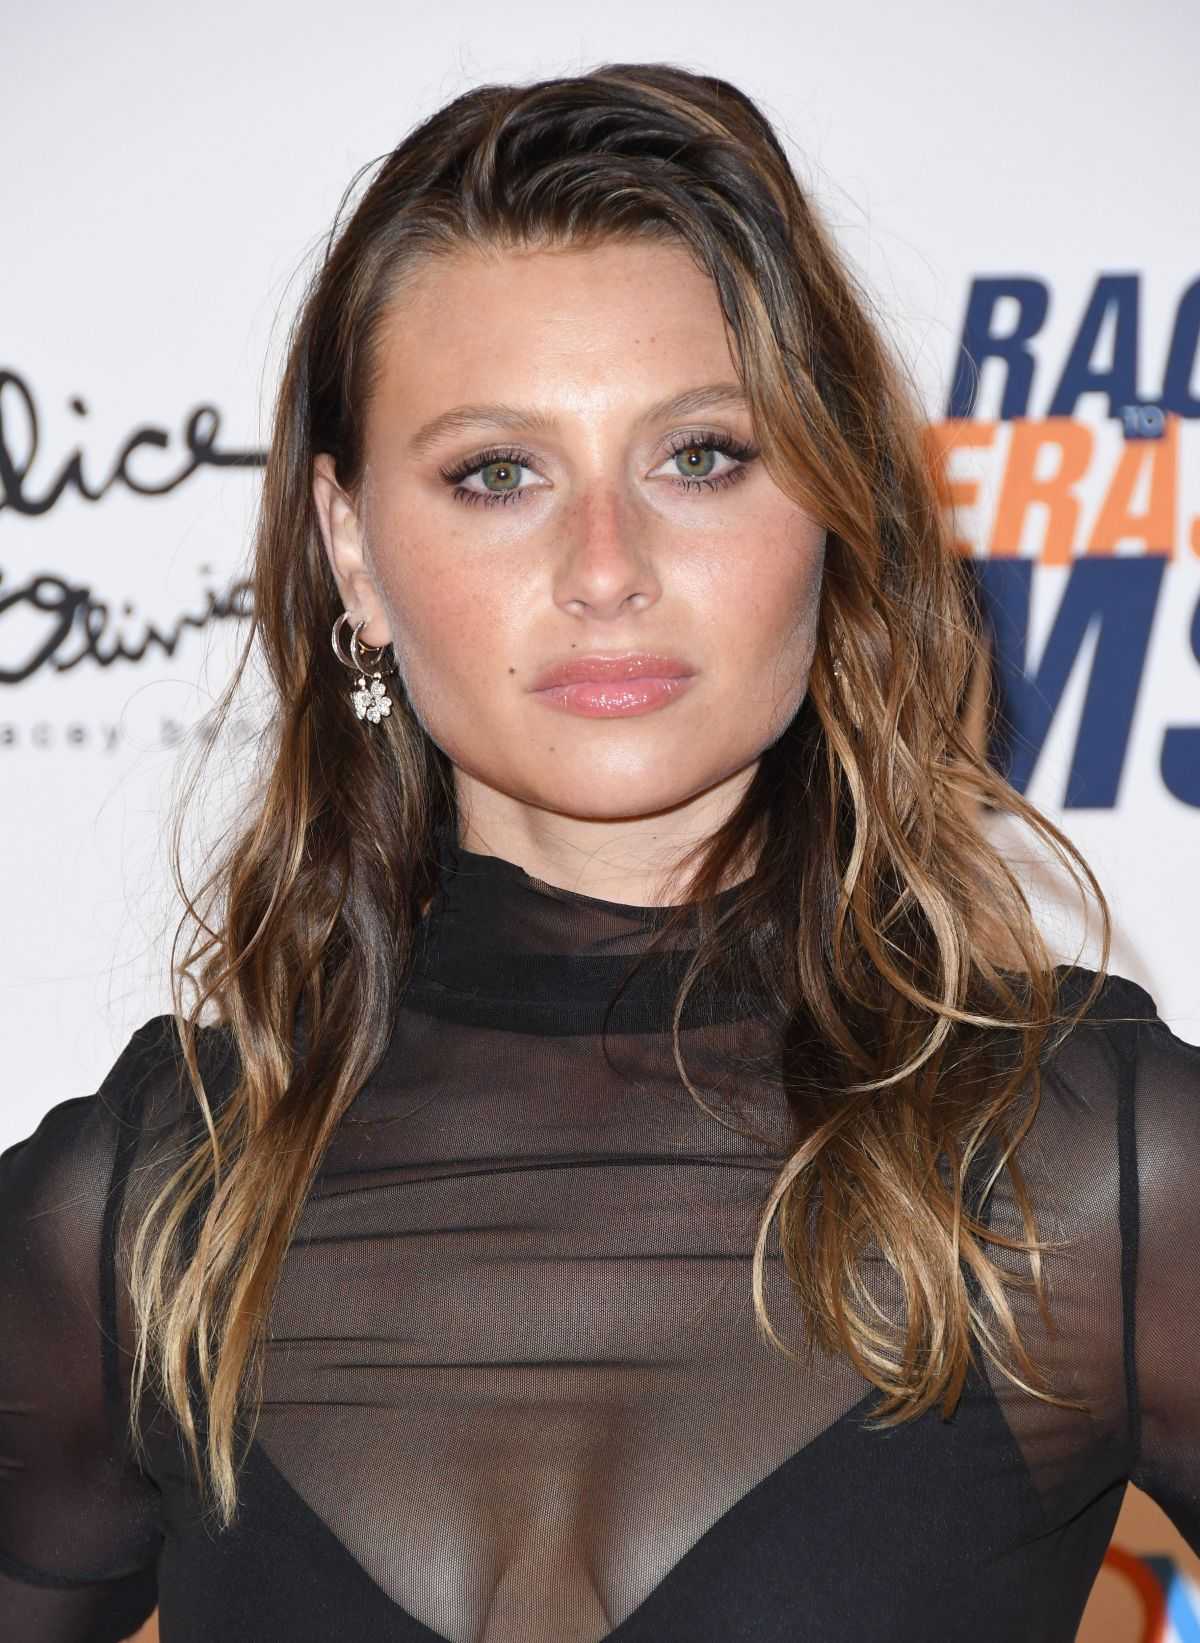 65+ Hottest Aly Michalka Pictures Will Get You All Sweating | Best Of Comic Books